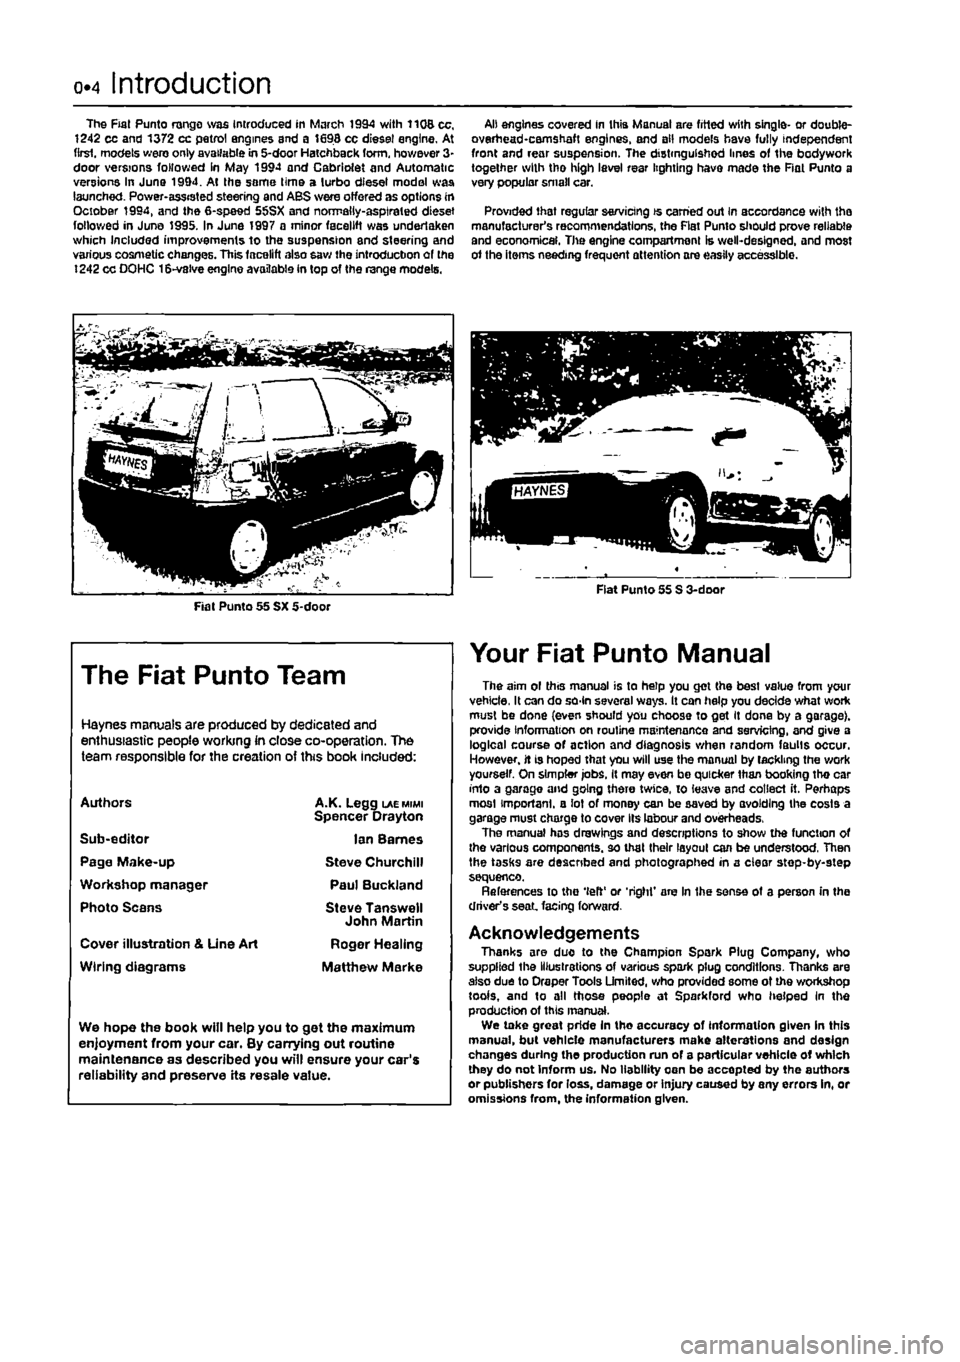 FIAT PUNTO 1997 176 / 1.G Workshop Manual 
0.4 Introduction 
The Fiat Punto range was Introduced in March 1994 with 1106 cc, 1242 cc and 1372 cc petrol engines and a 1698 cc diesel engine. At first, models wero only available in 5-door Hatchb